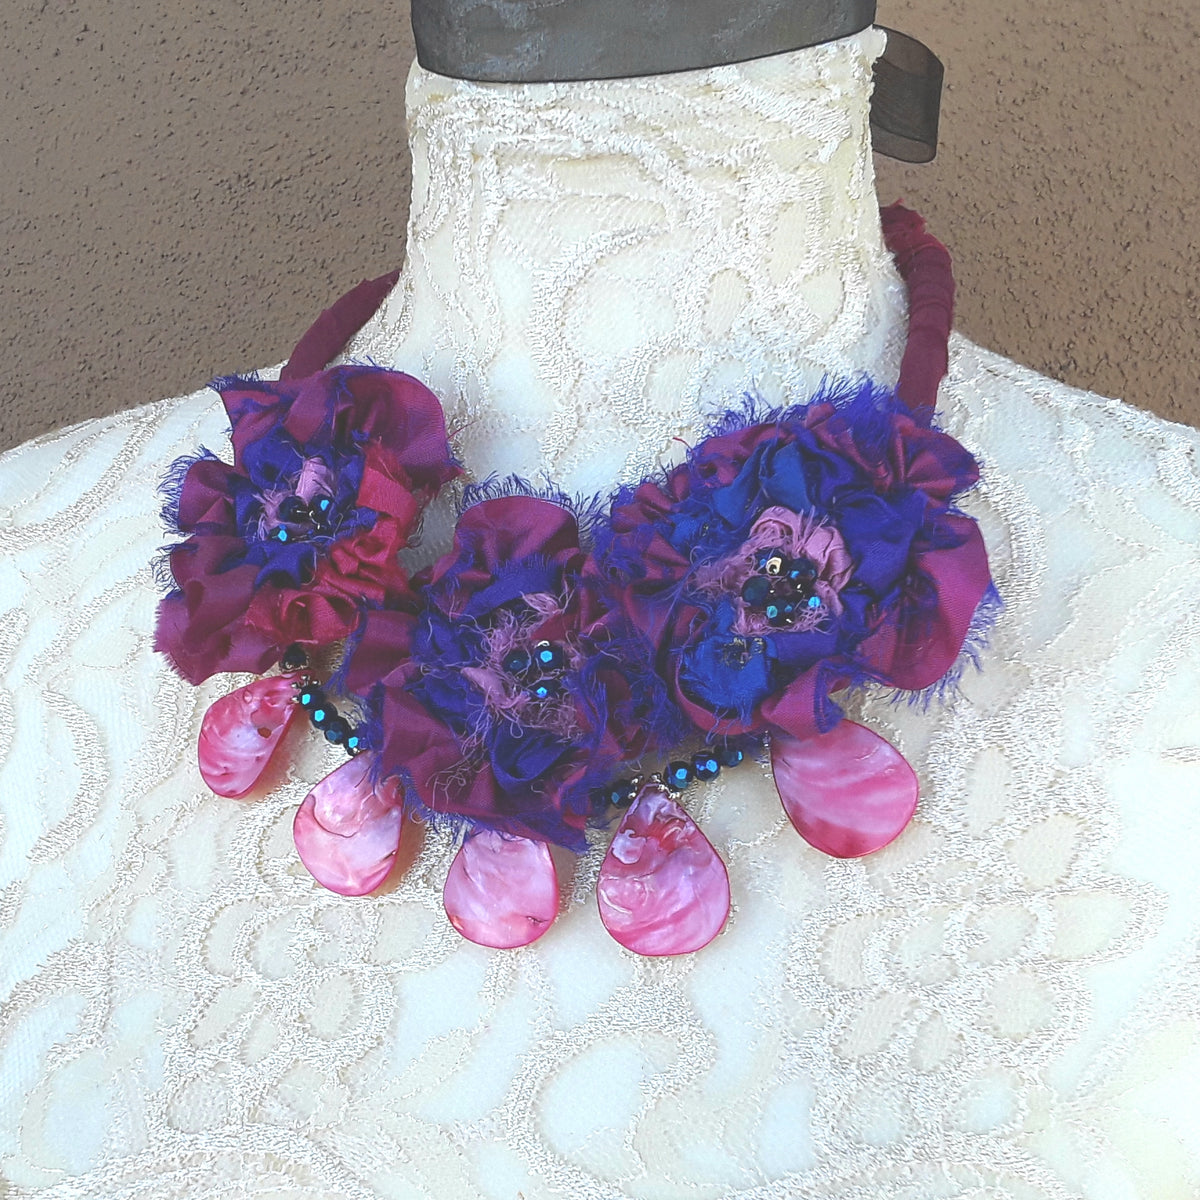 Shell Sari Ribbon Flower Multi-Strand Statement Necklace - Colorful Upcycled Boho Gift for Her